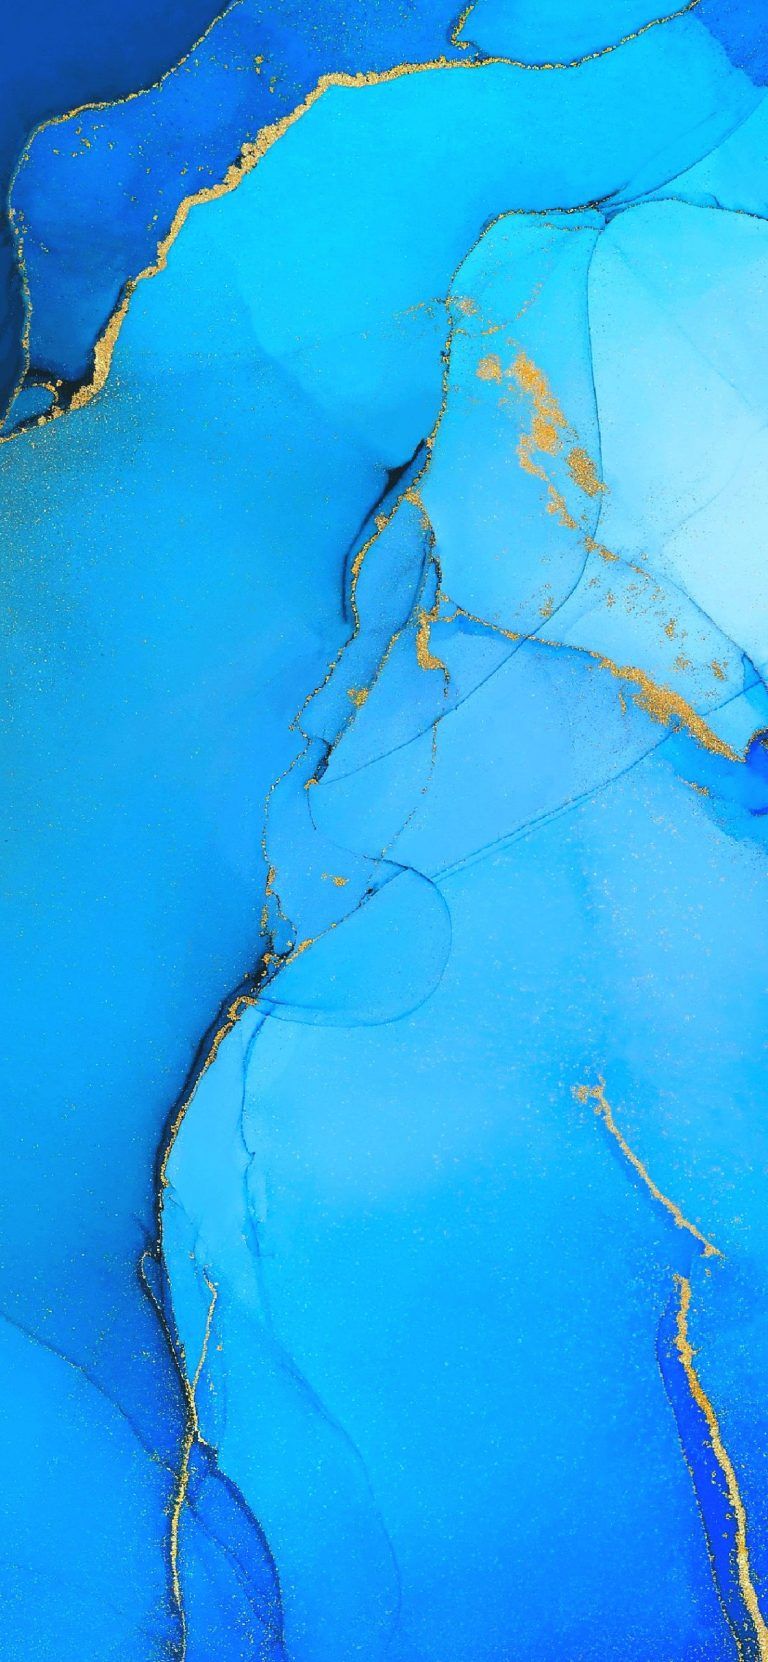 Android Amazing Cute Blue Abstract UHD 4K Wallpaper Download Free